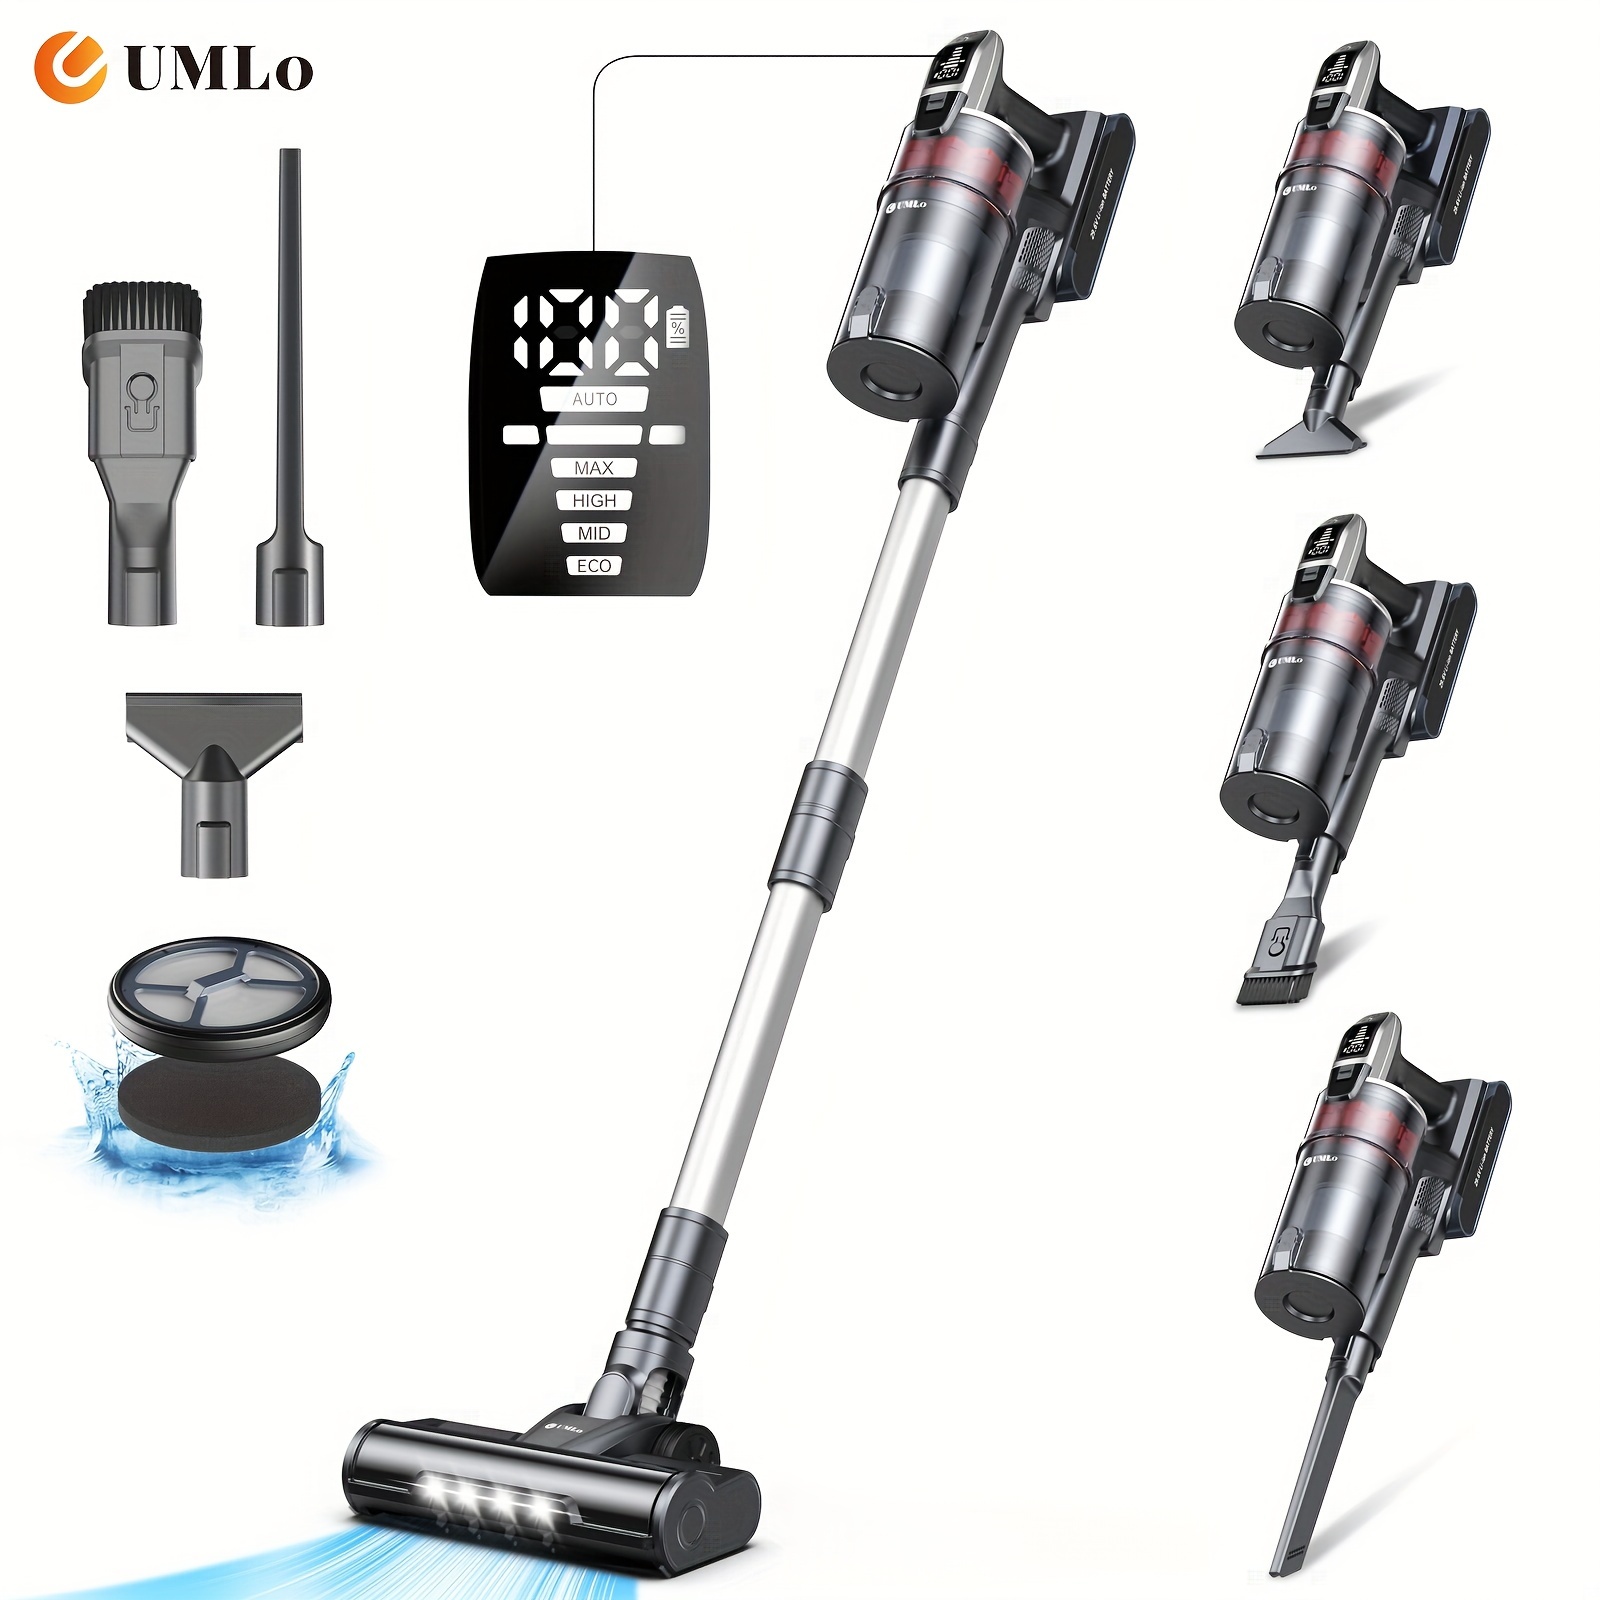 

Cordless Vacuum Cleaner, 500w/33kpa Stick Vacuum, Auto Mode, 60mins Runtime, 8-in-1 Cleaner For Home, Lightweight Vacuum, Anti-tangle, Led Screen For Floor Carpet Pet Hair